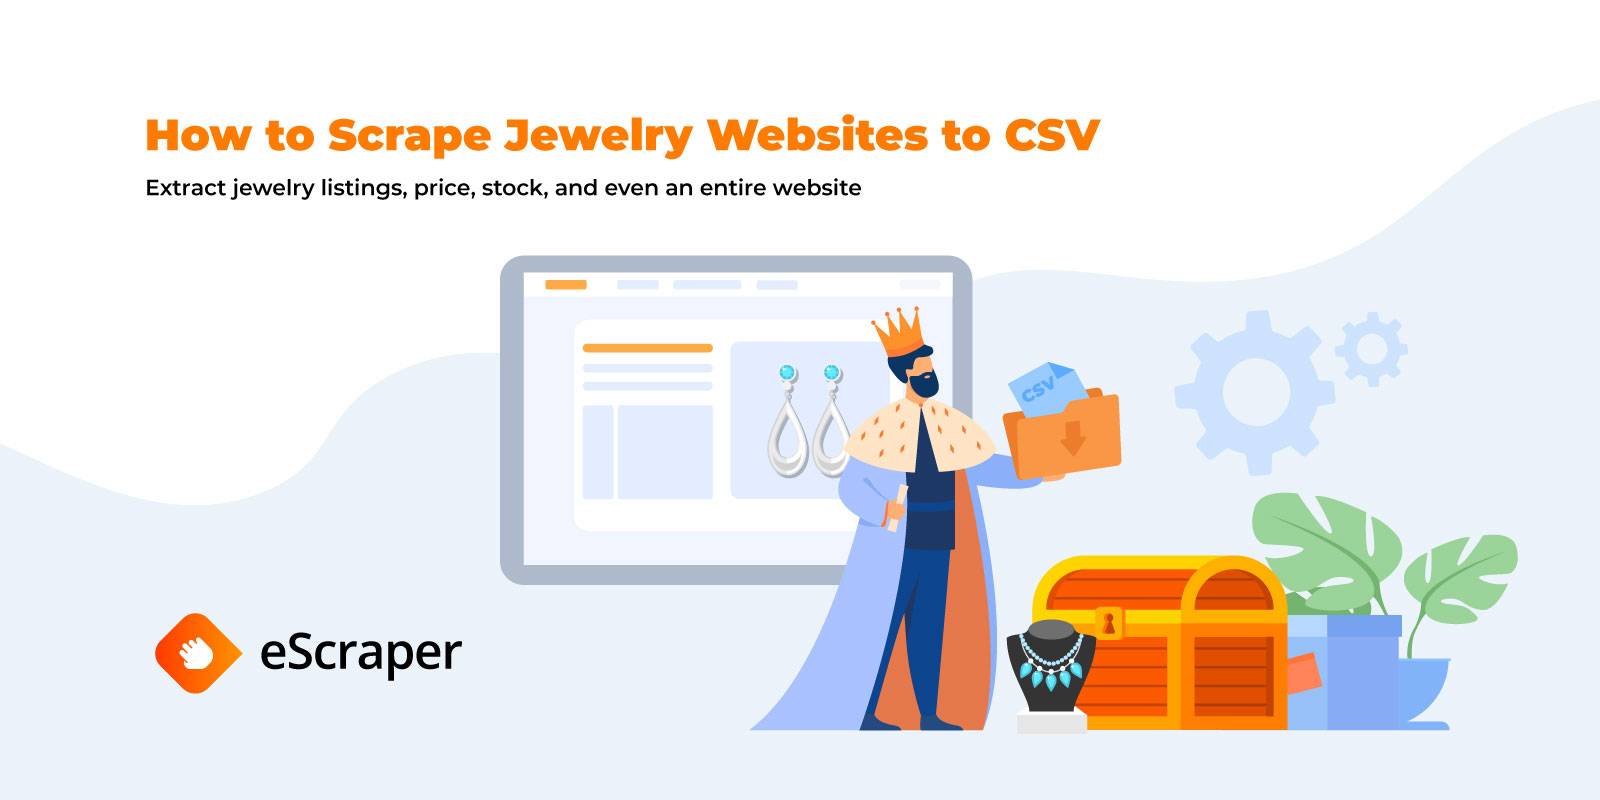 Jewelry websites scraping: use cases